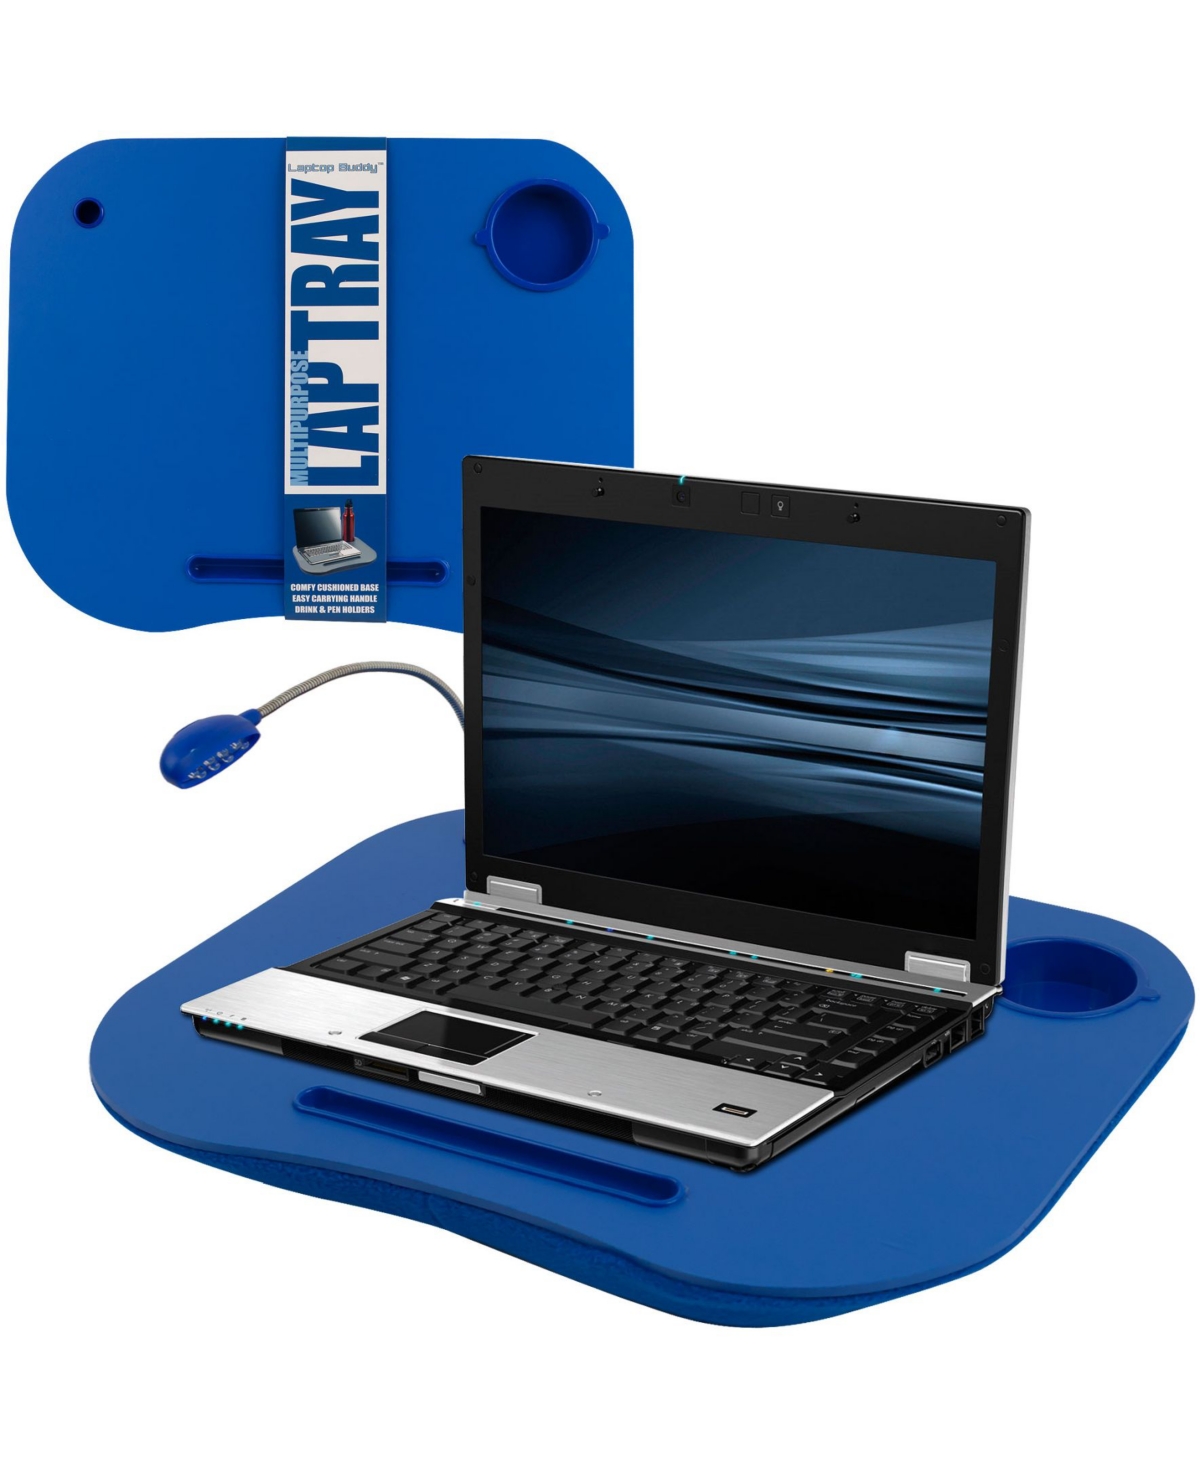 Tg Lap Desk with Built in Cushion, Led Light and Cup Holder - Blue